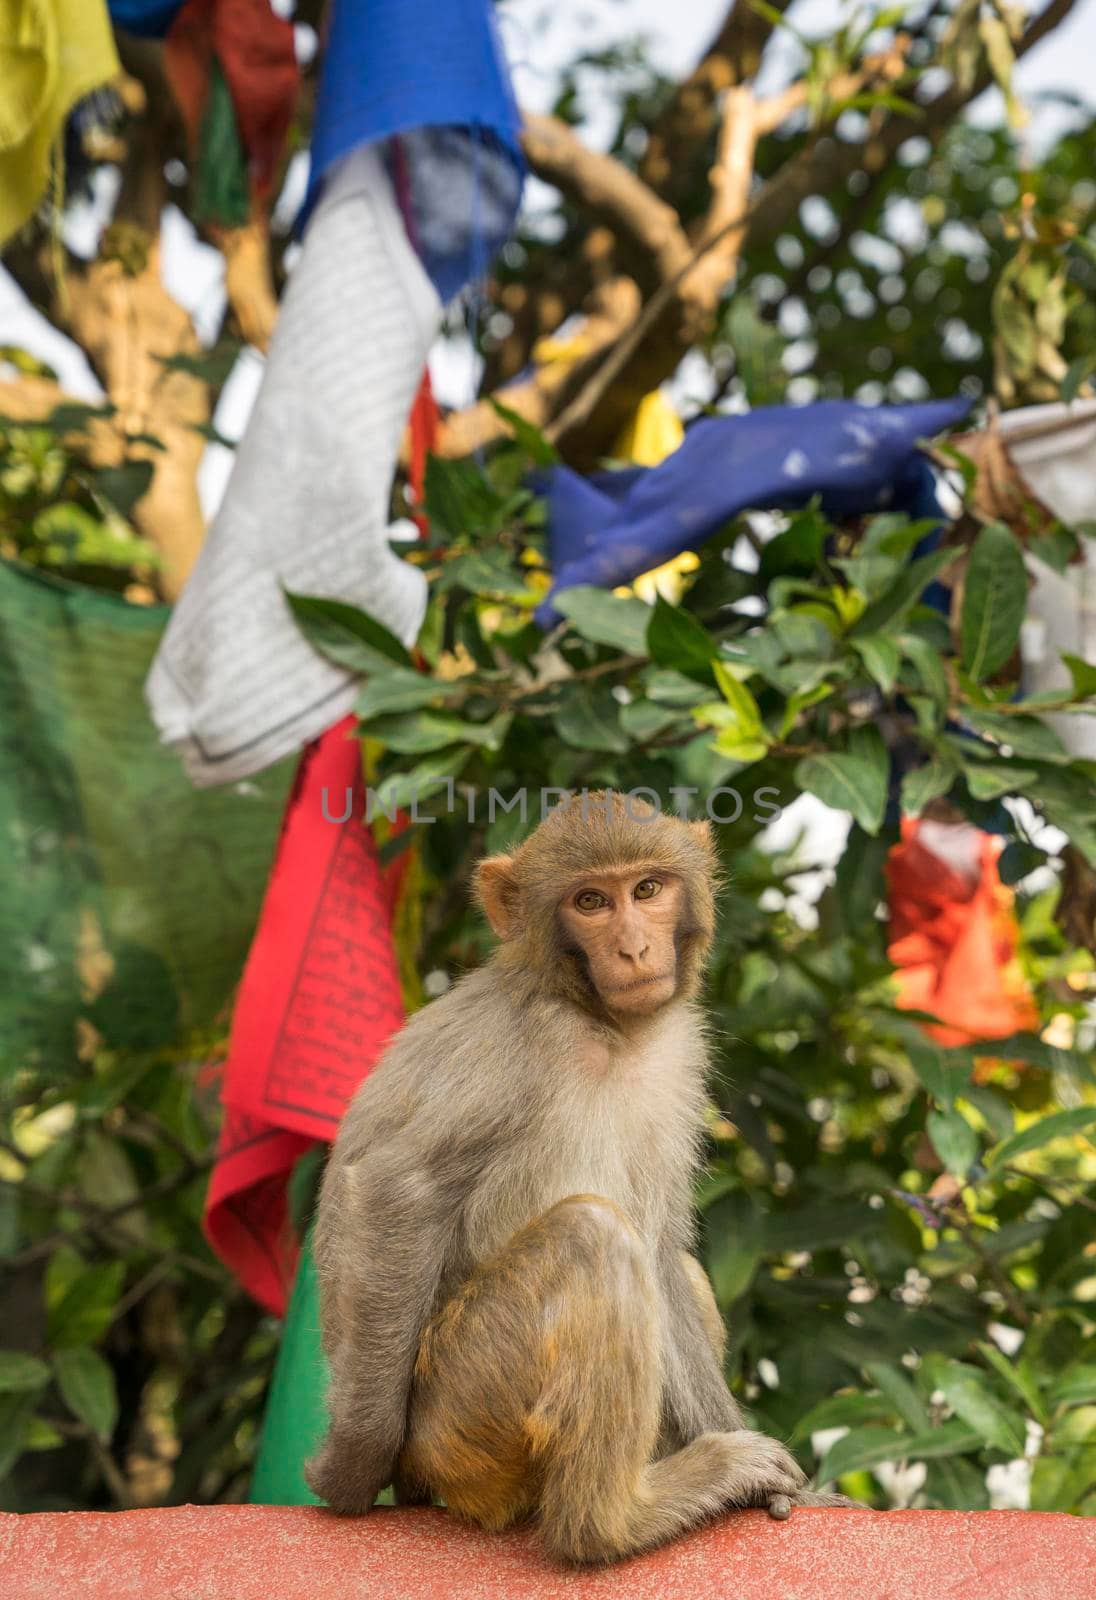 Monkey and prayer flags from Swayambunath temple in Kathmandu. Religion in Nepal